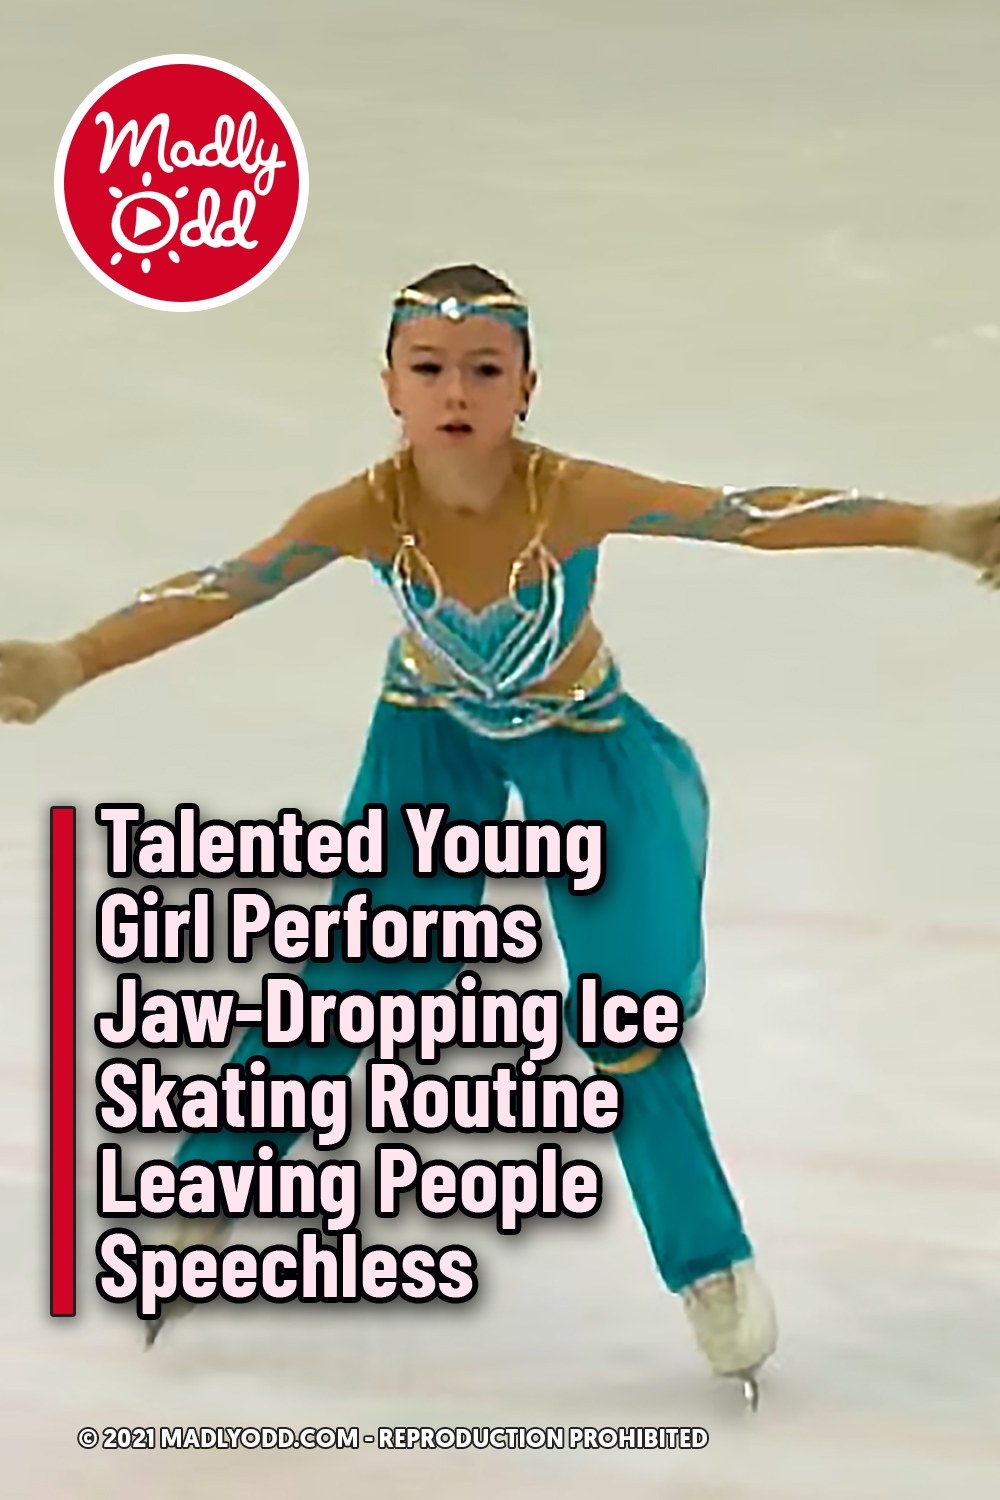 Talented Young Girl Performs Jaw-Dropping Ice Skating Routine Leaving People Speechless